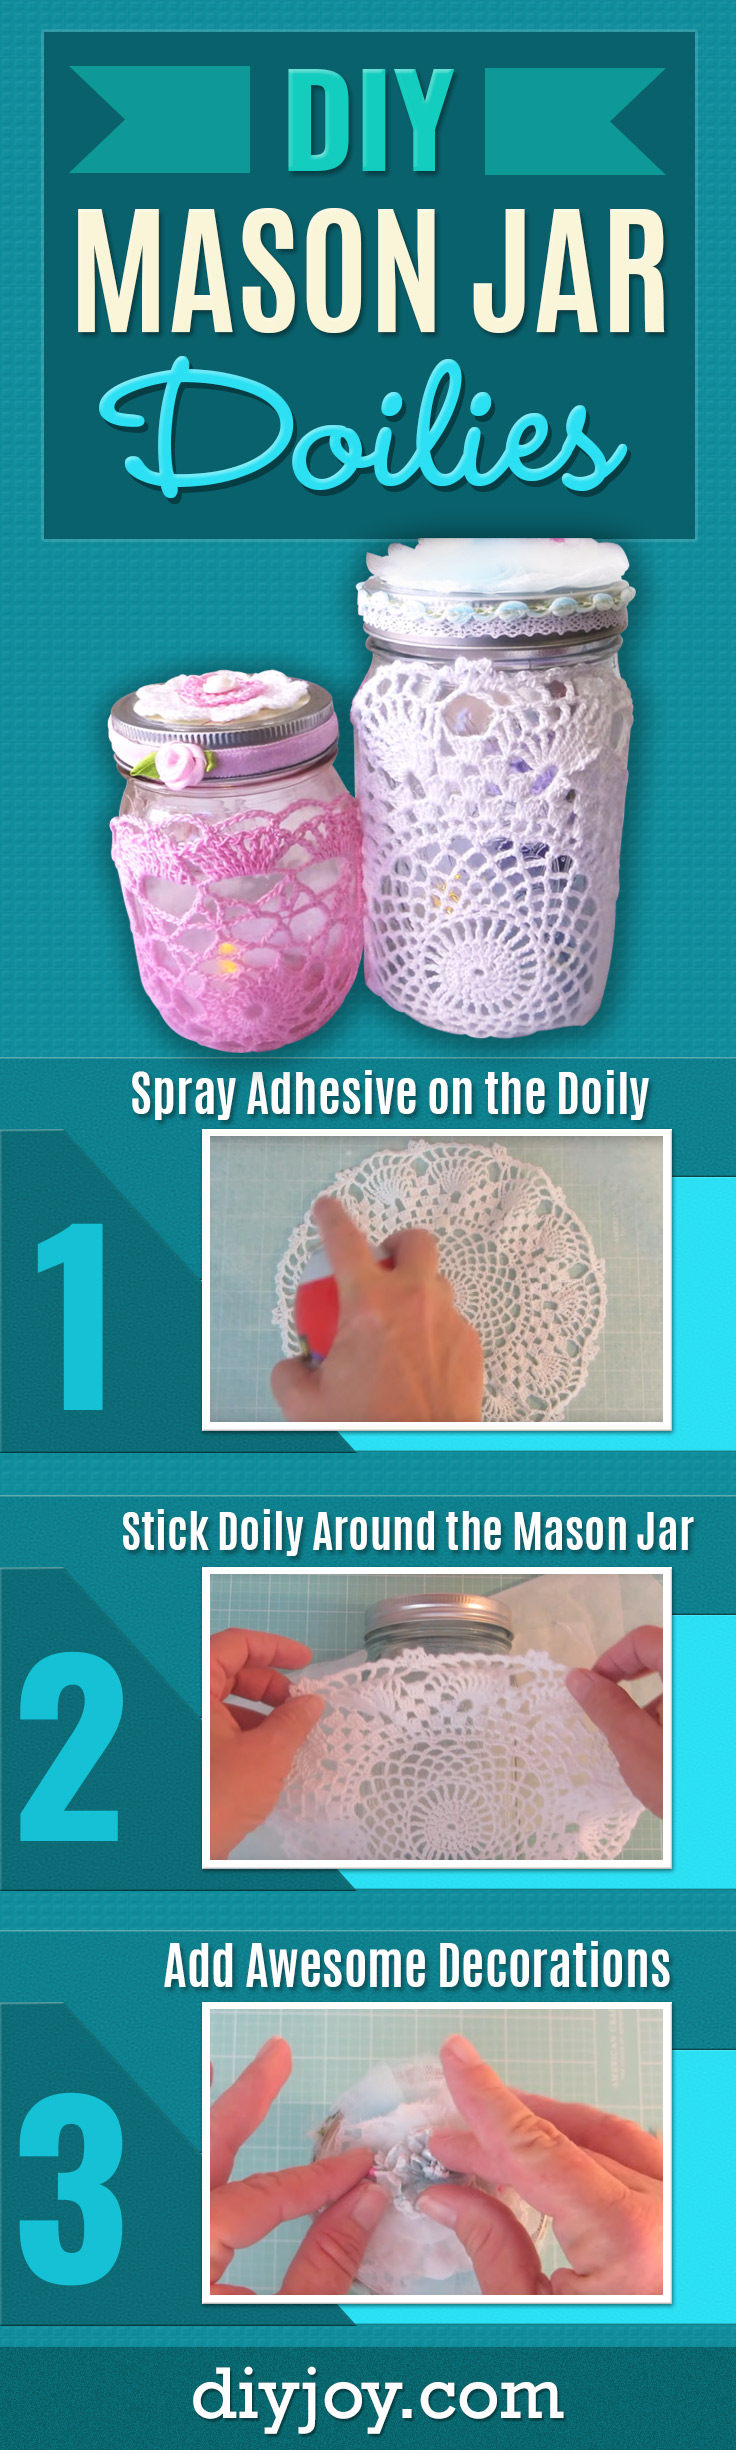 DIY Mothers Day Gift Ideas - Mason Jar Doilies - Homemade Gifts for Moms - Crafts and Do It Yourself Home Decor, Accessories and Fashion To Make For Mom - Mothers Love Handmade Presents on Mother's Day - DIY Projects and Crafts by DIY JOY 